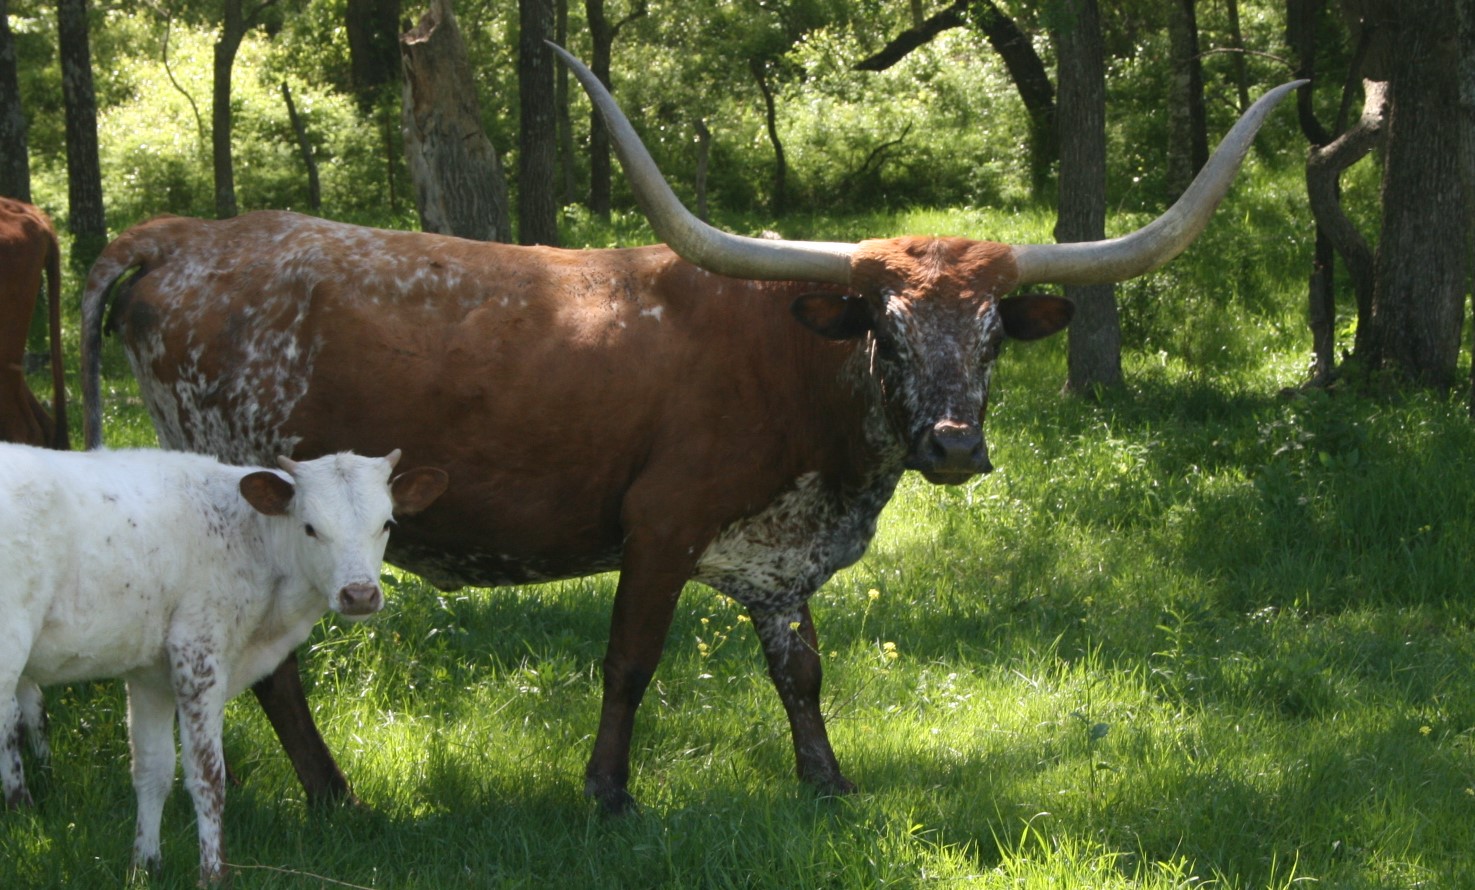 A picture containing grass, cow, tree, outdoor

Description automatically generated